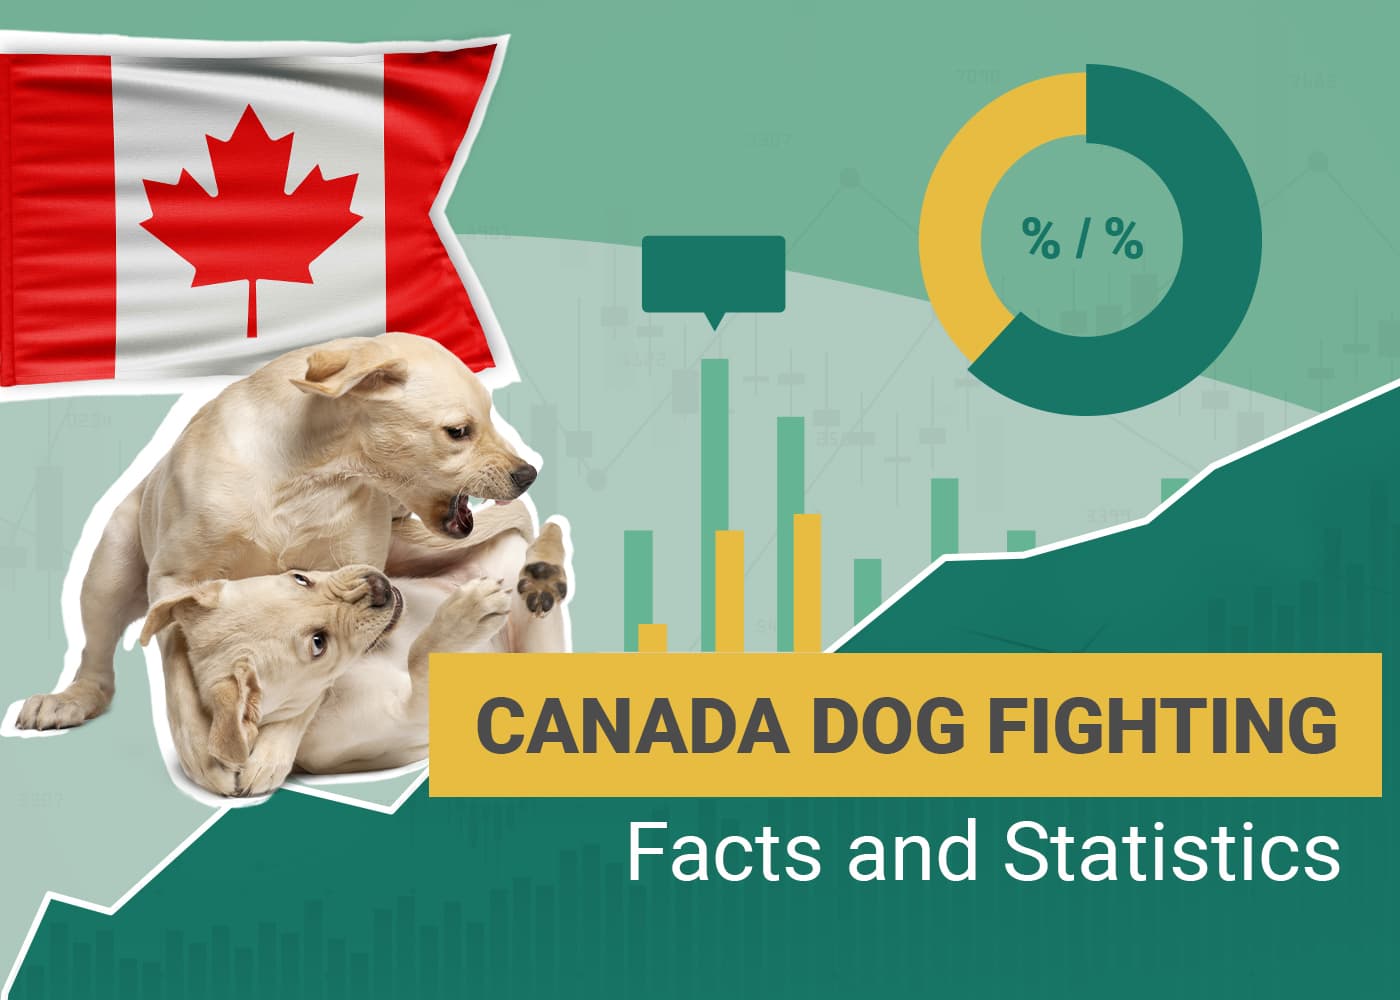 Canada Dog Fighting Facts and Statistics